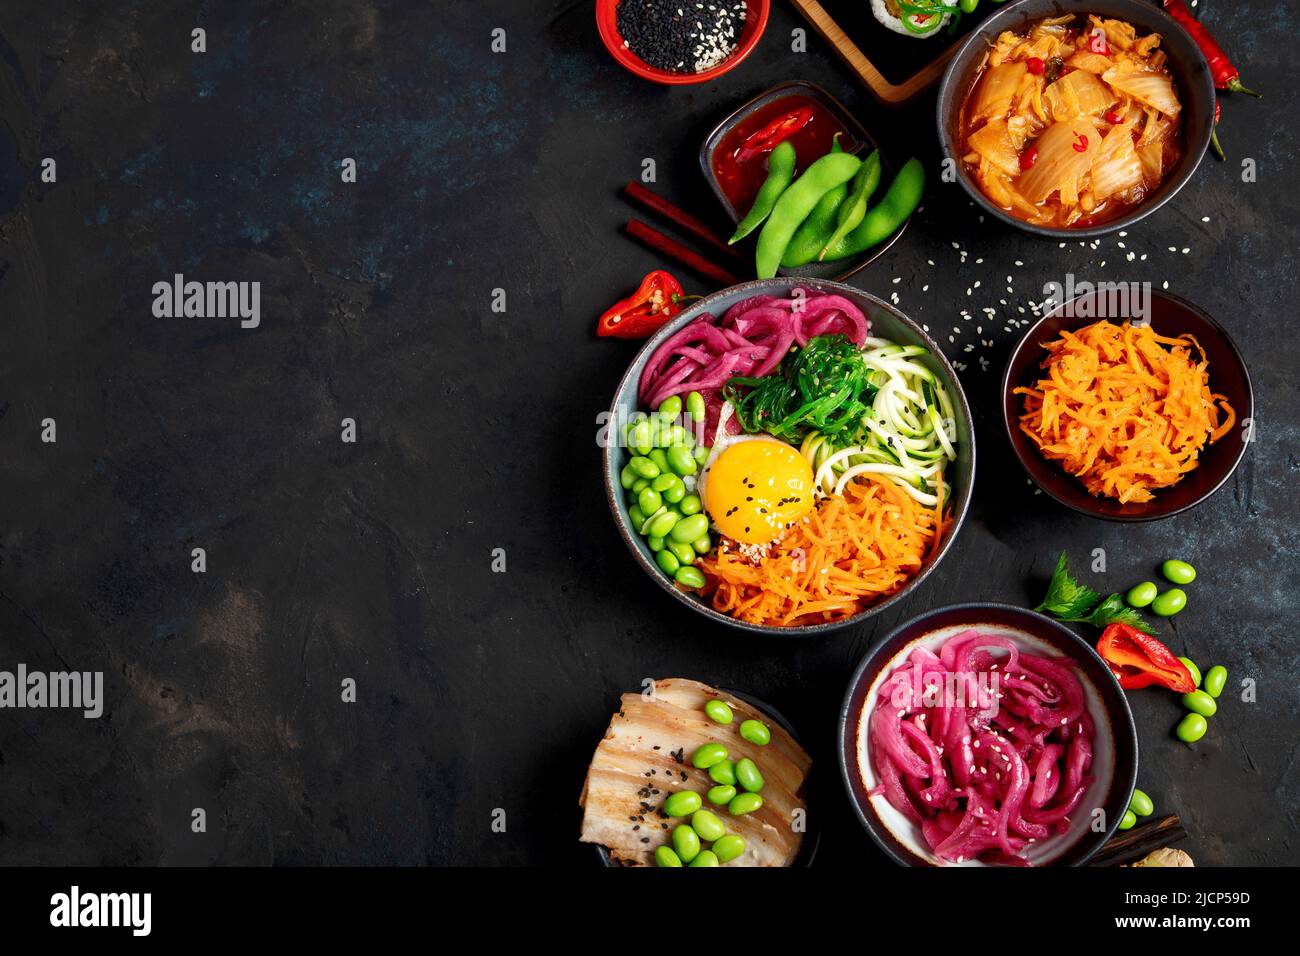 Assortment of Korean food on dark background. Asian dishes and appetizers of indeed cuisine. Top view, flat lay, copy space Stock Photo